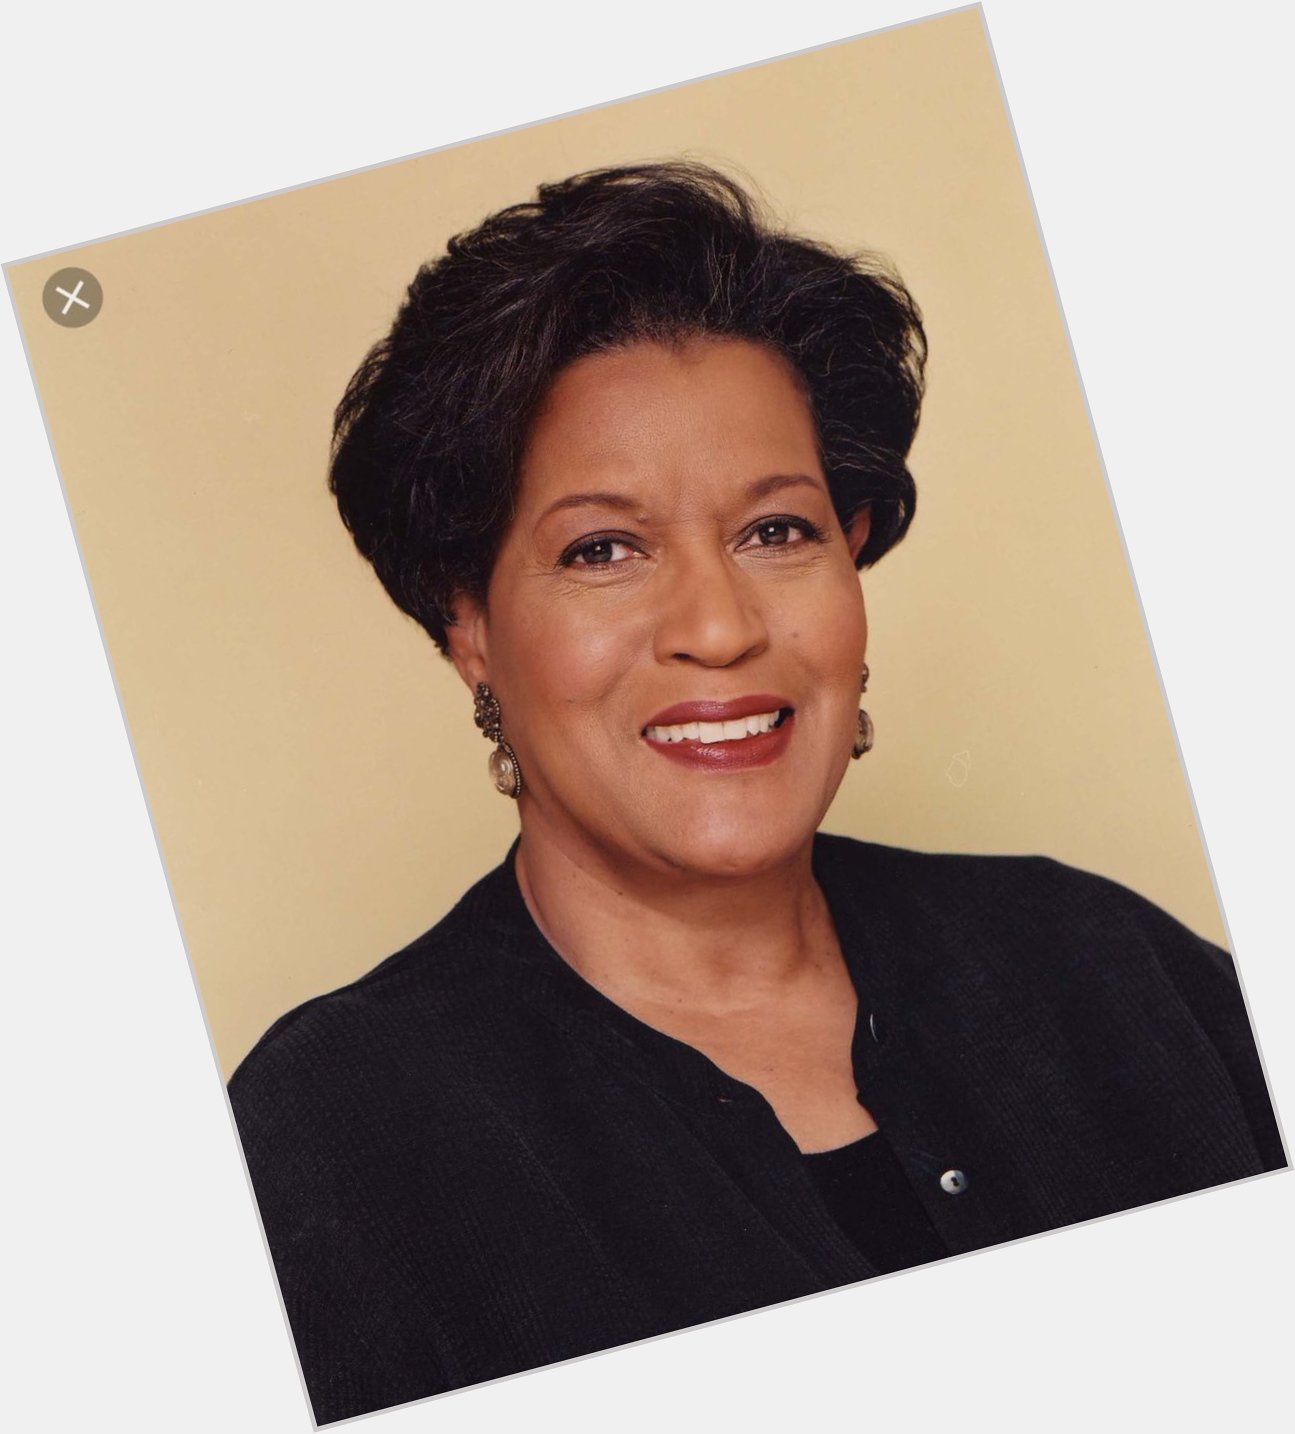 Happy birthday to our former chairwoman Myrlie Evers-Williams! 